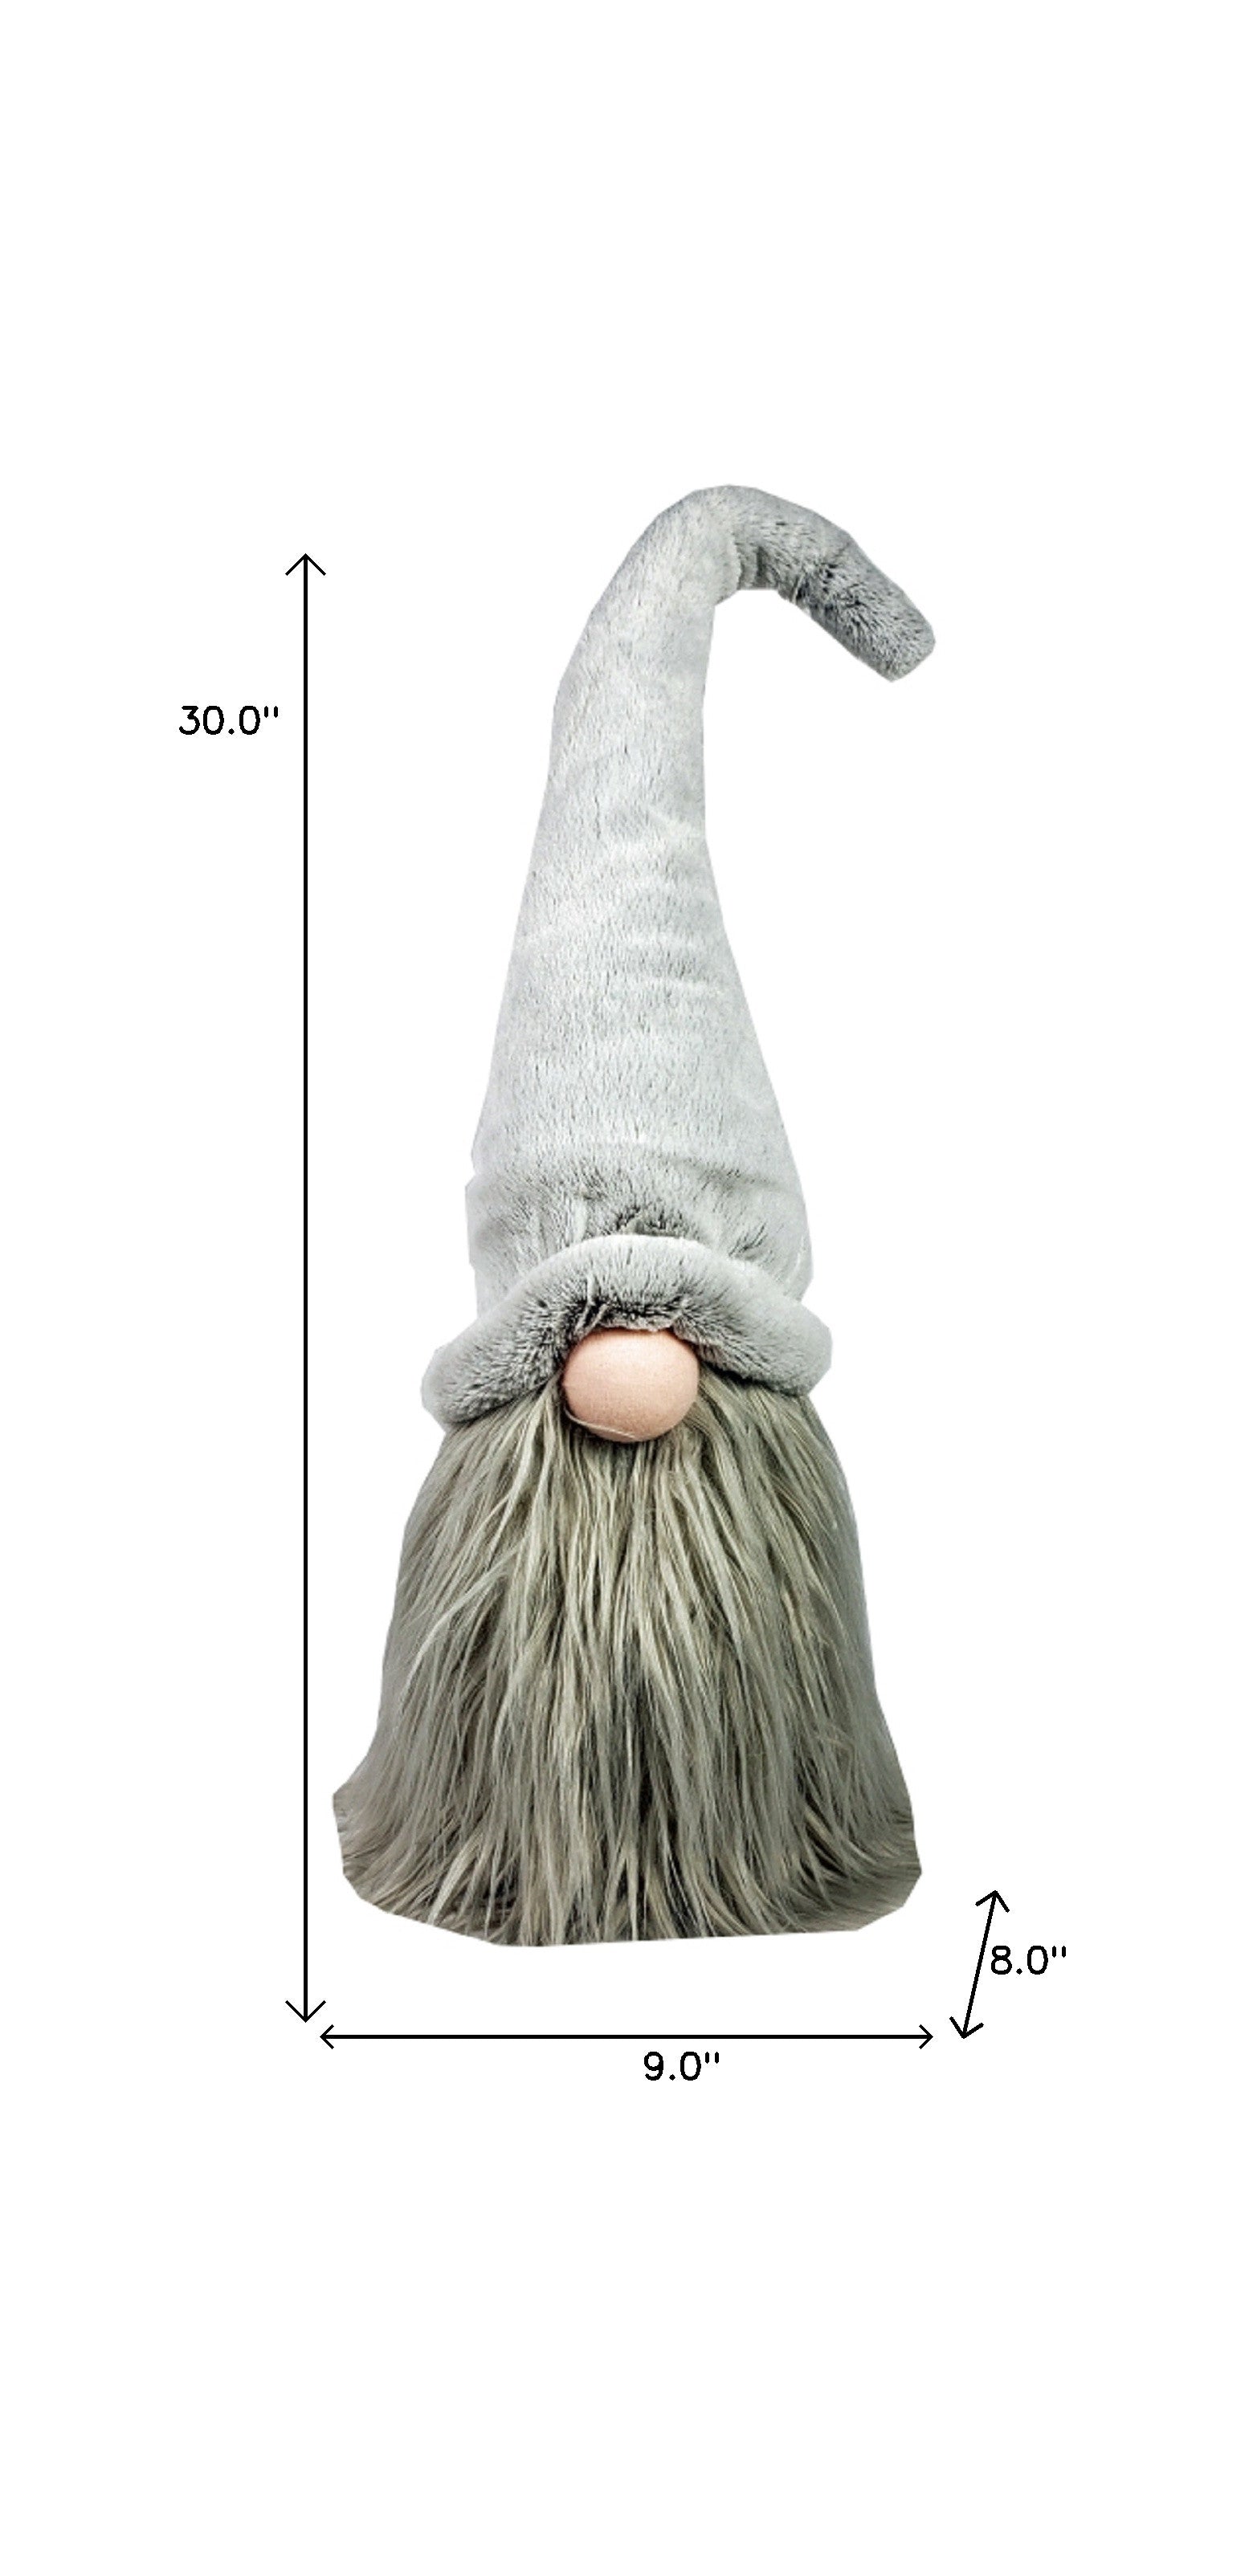 30" Groovy Grey with Pointy Hat Fabric Sitting Gnome Sculpture